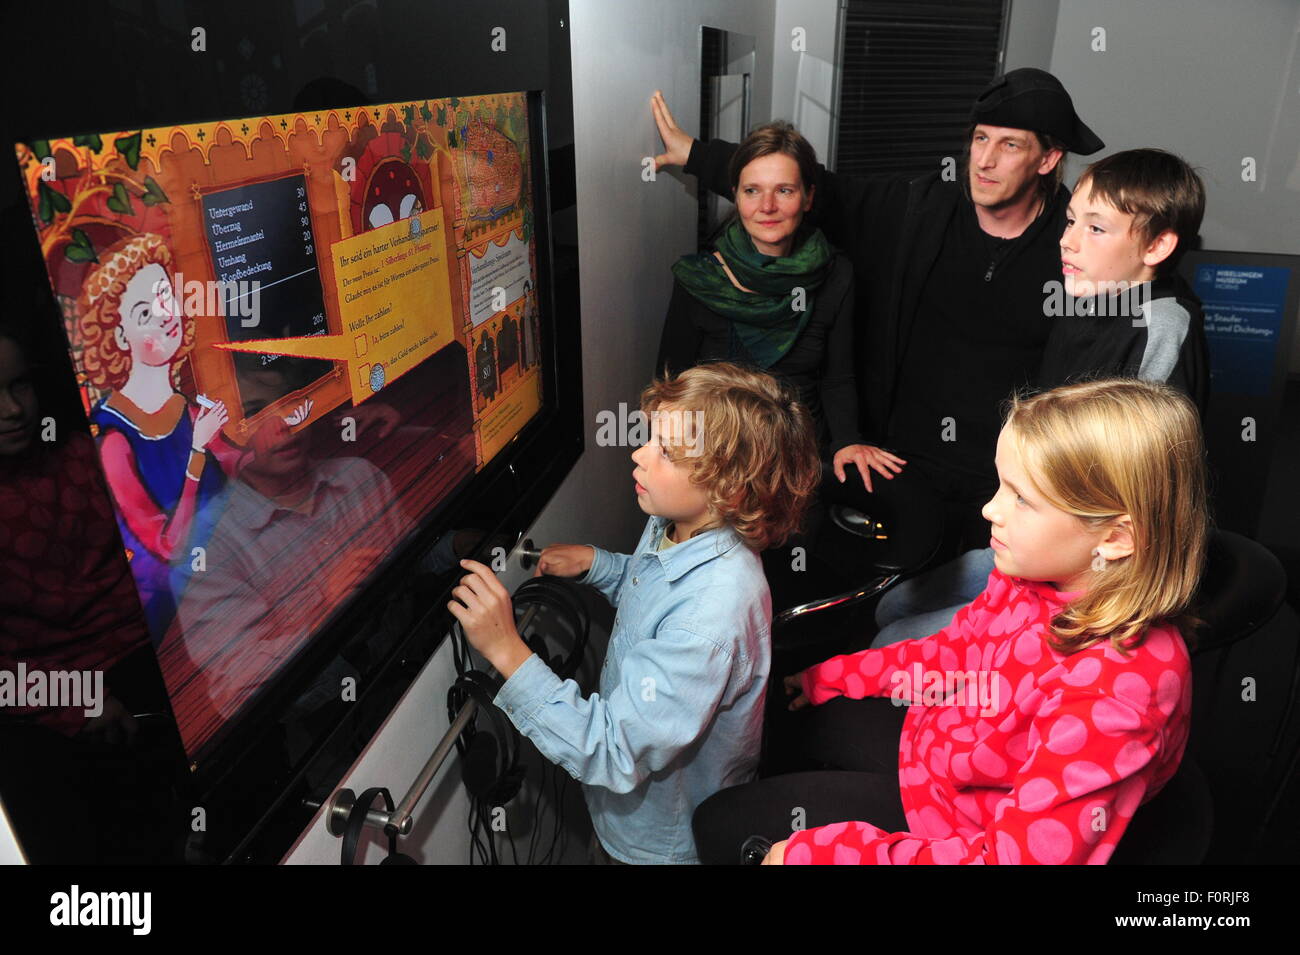 Worms, Germany - Septemer 7, 2010 - Children touching screen in Museum of Nibelungen for education and learning Stock Photo